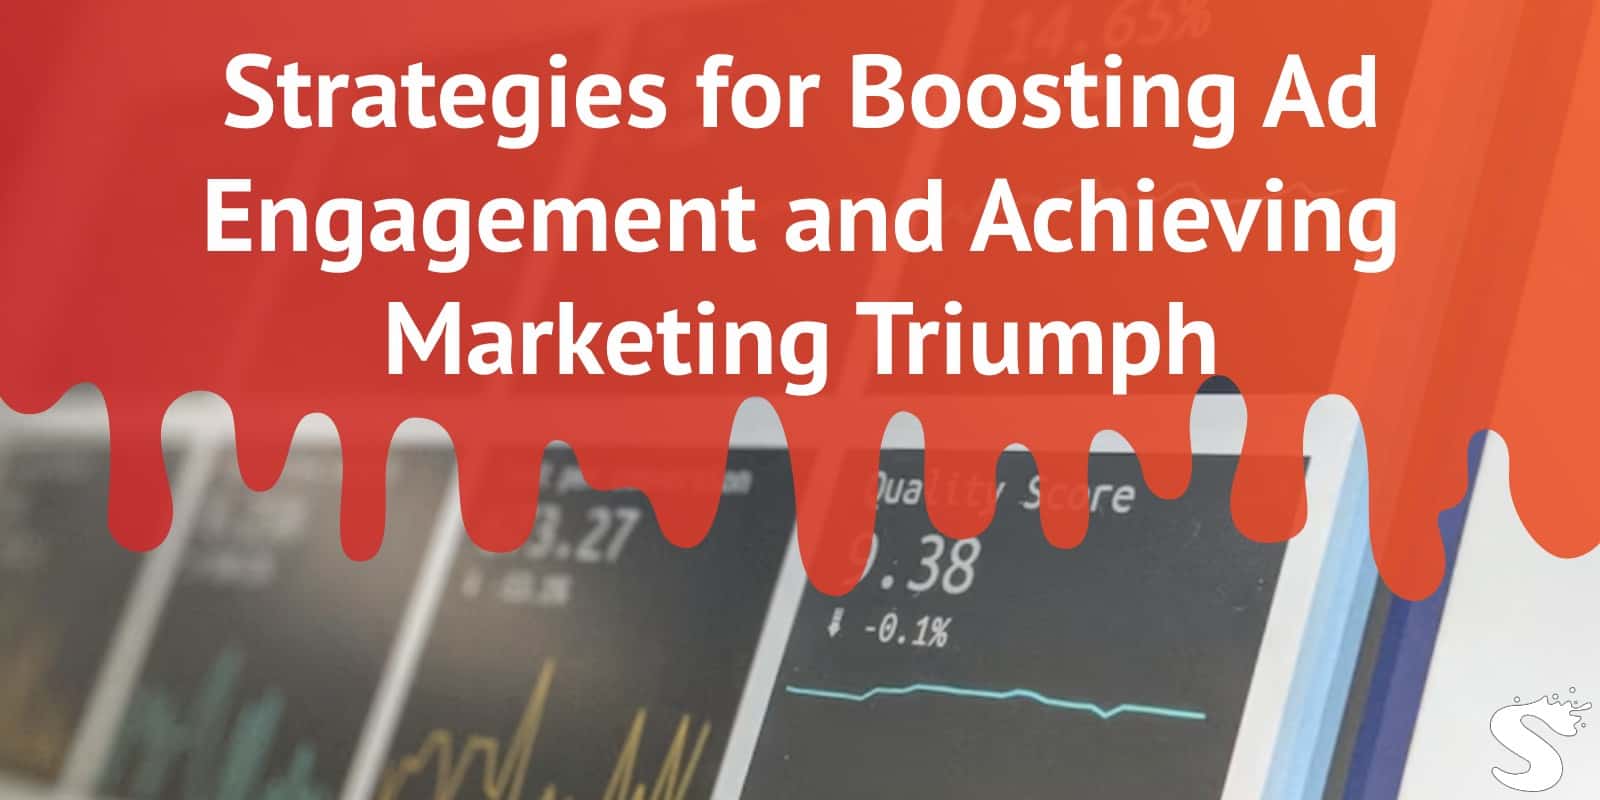 Strategies for Boosting Ad Engagement and Achieving Marketing Triumph